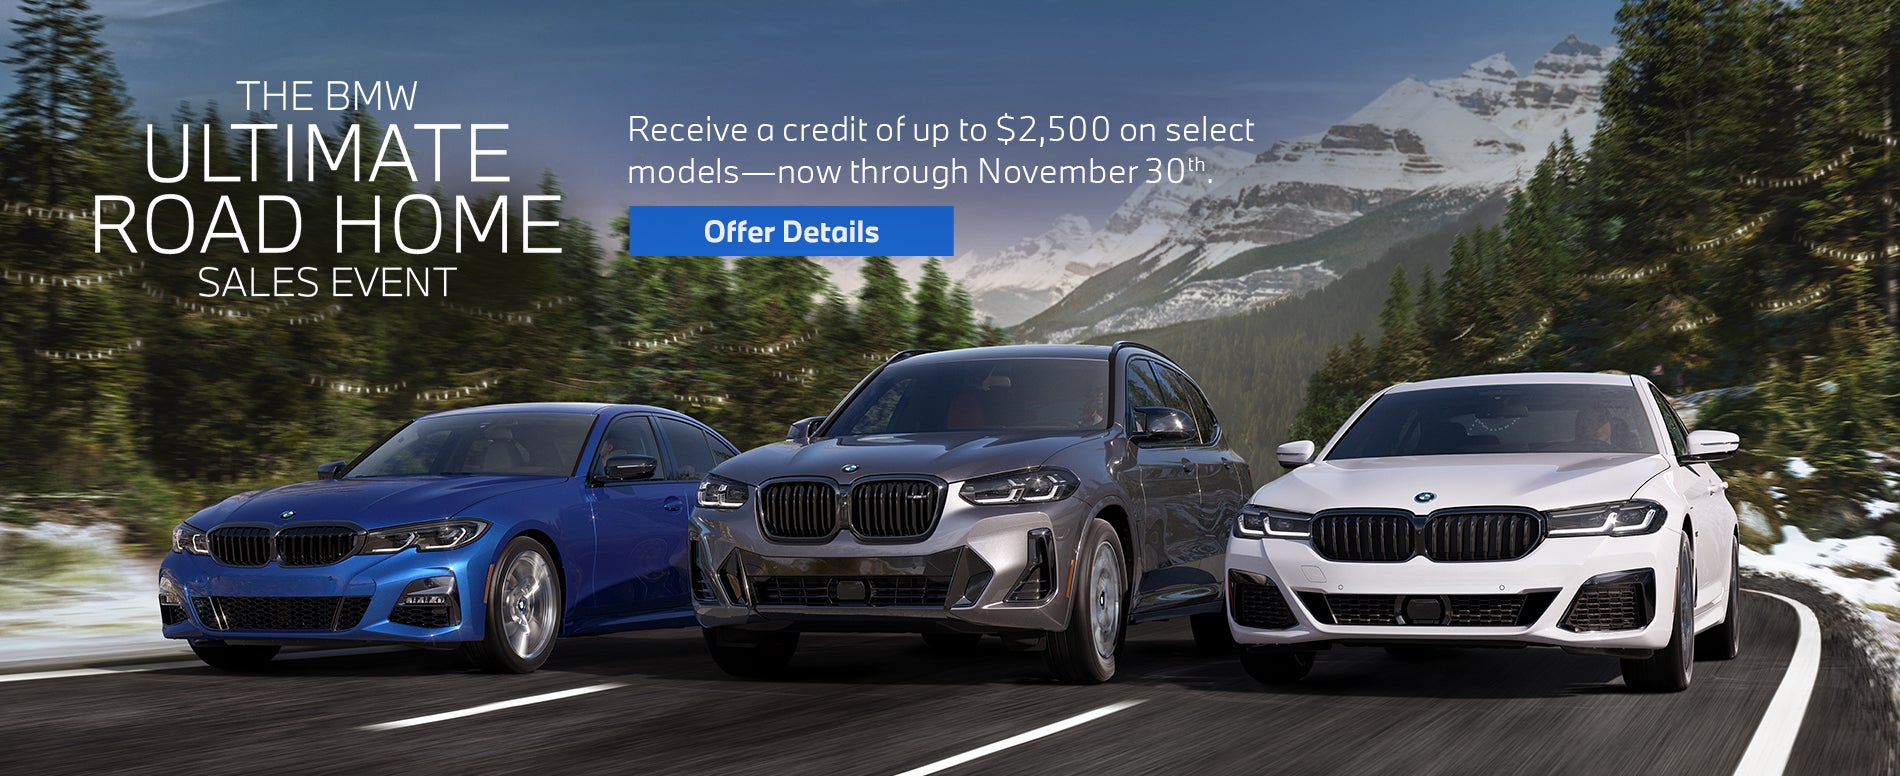 BMW Ultimate Road Home Sales Event